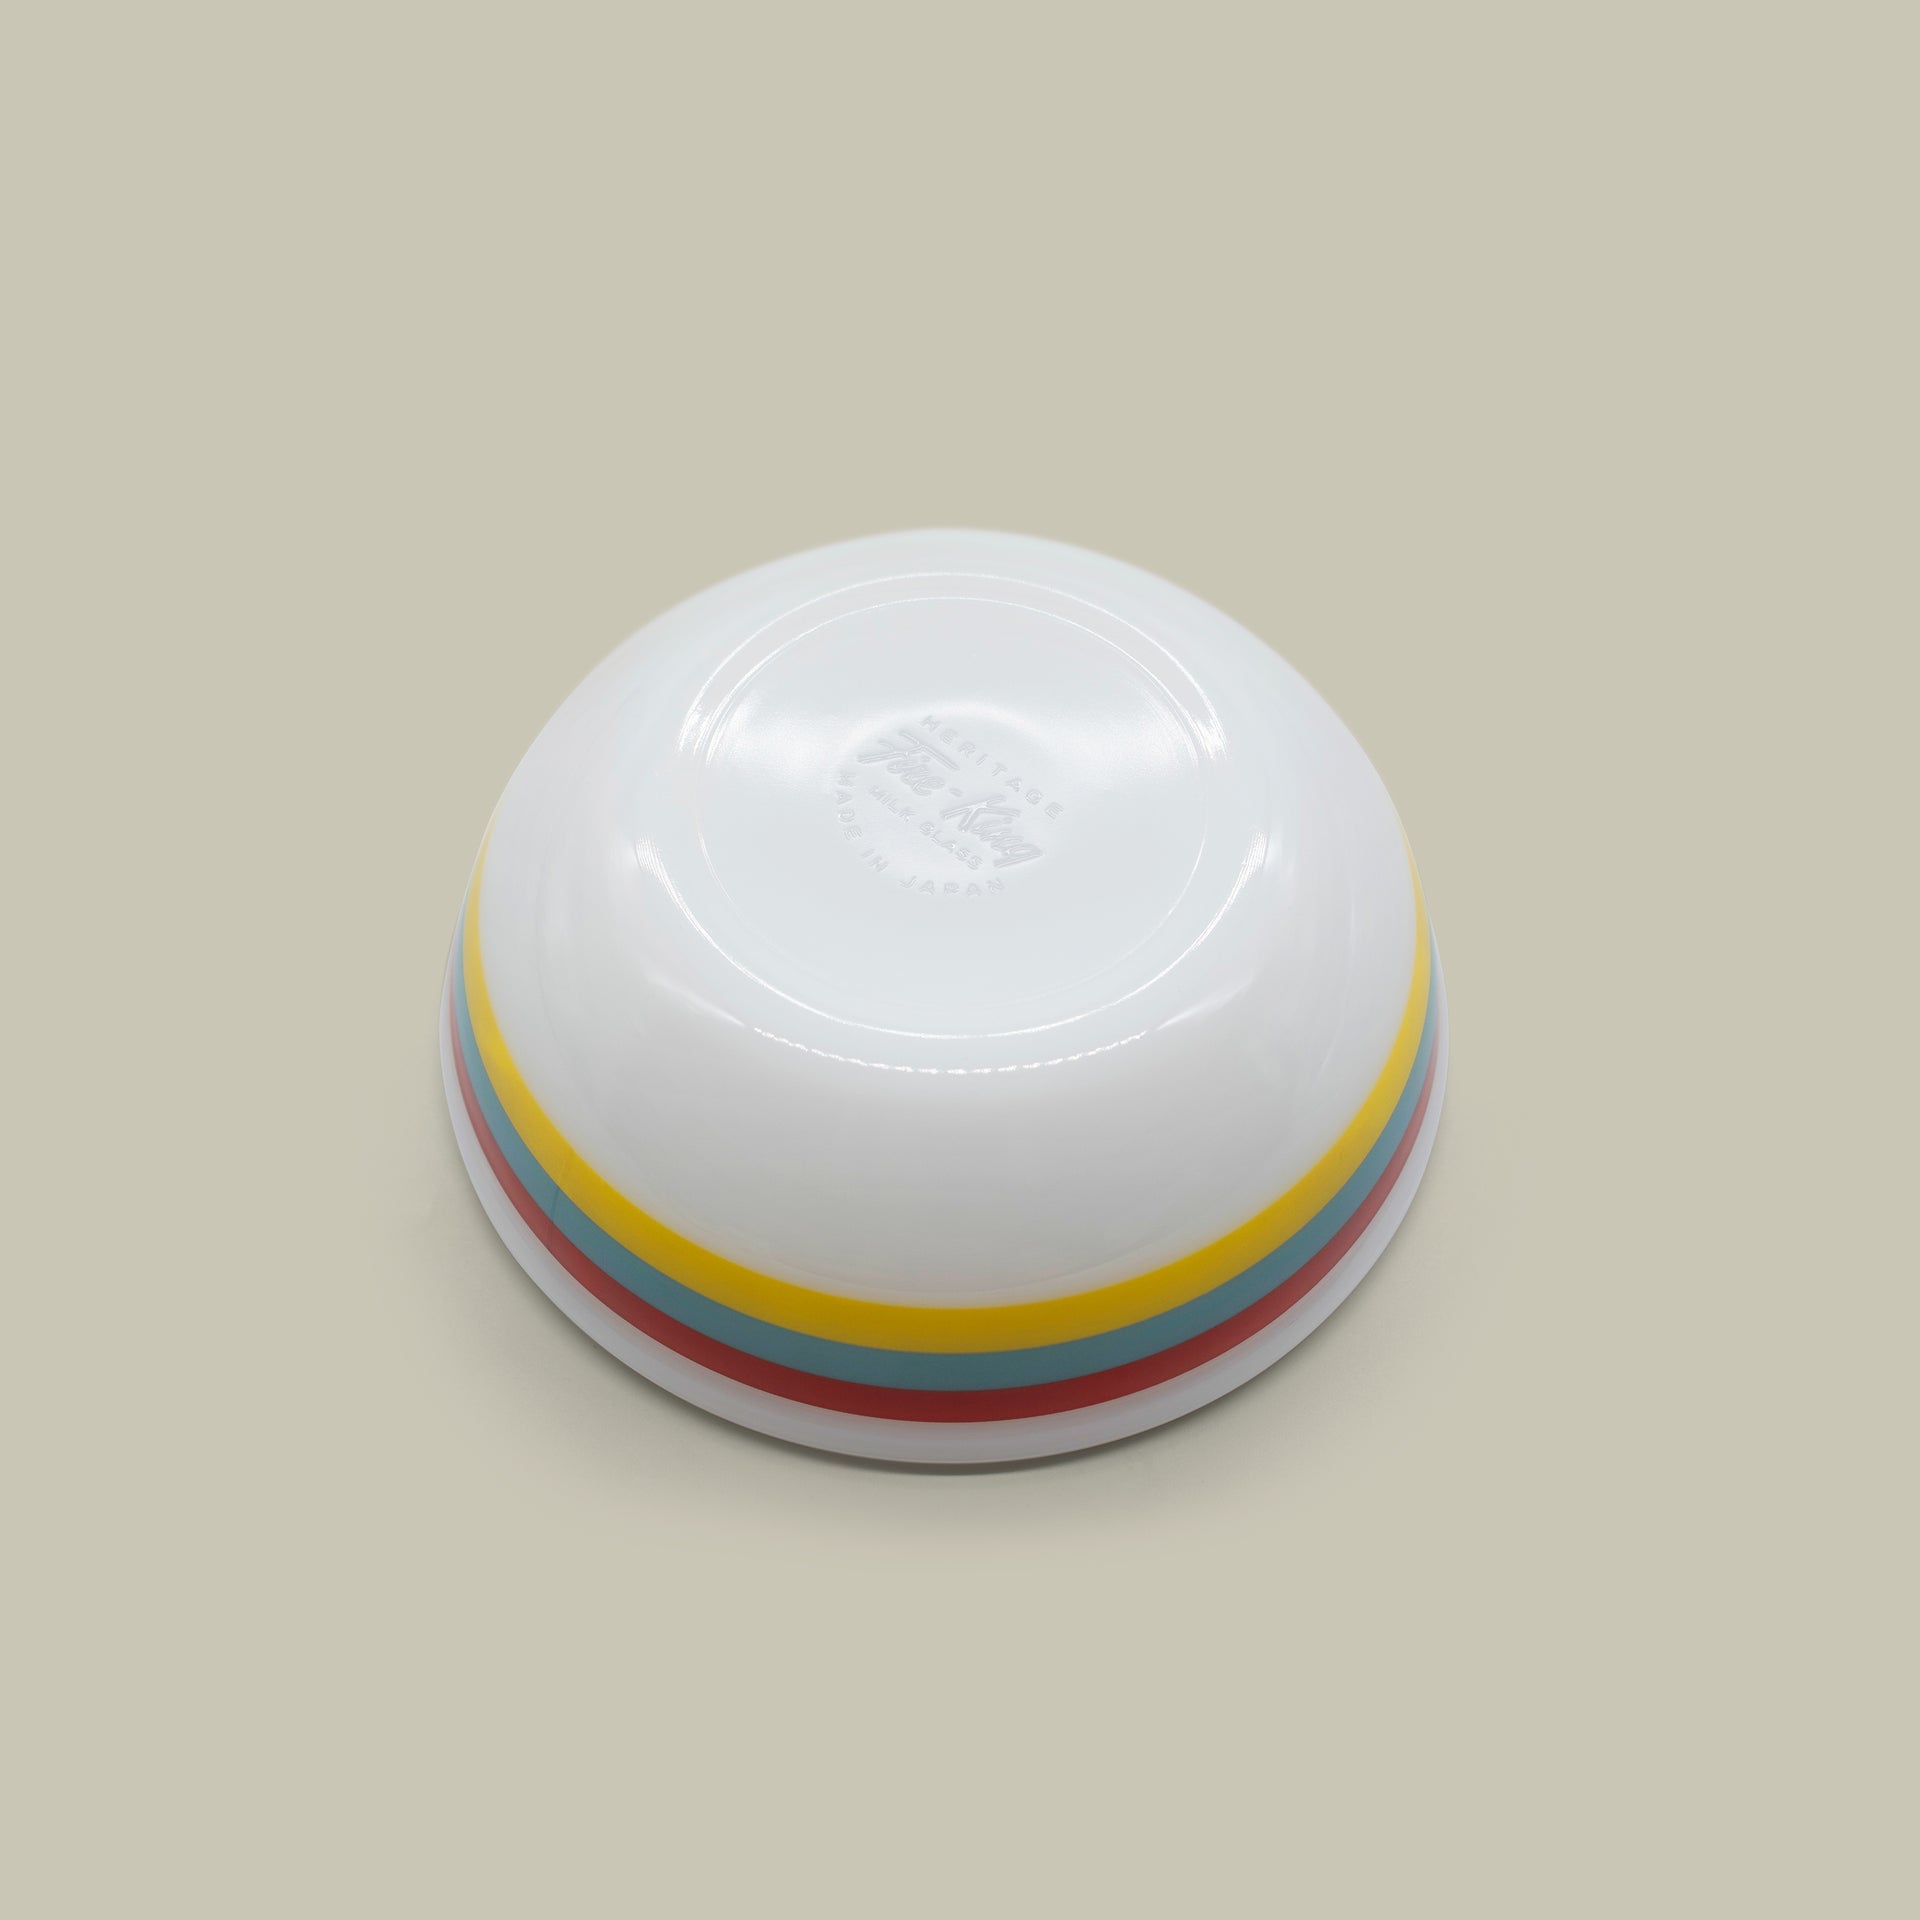 Fire-King Japan -Bowl in White Rainbow